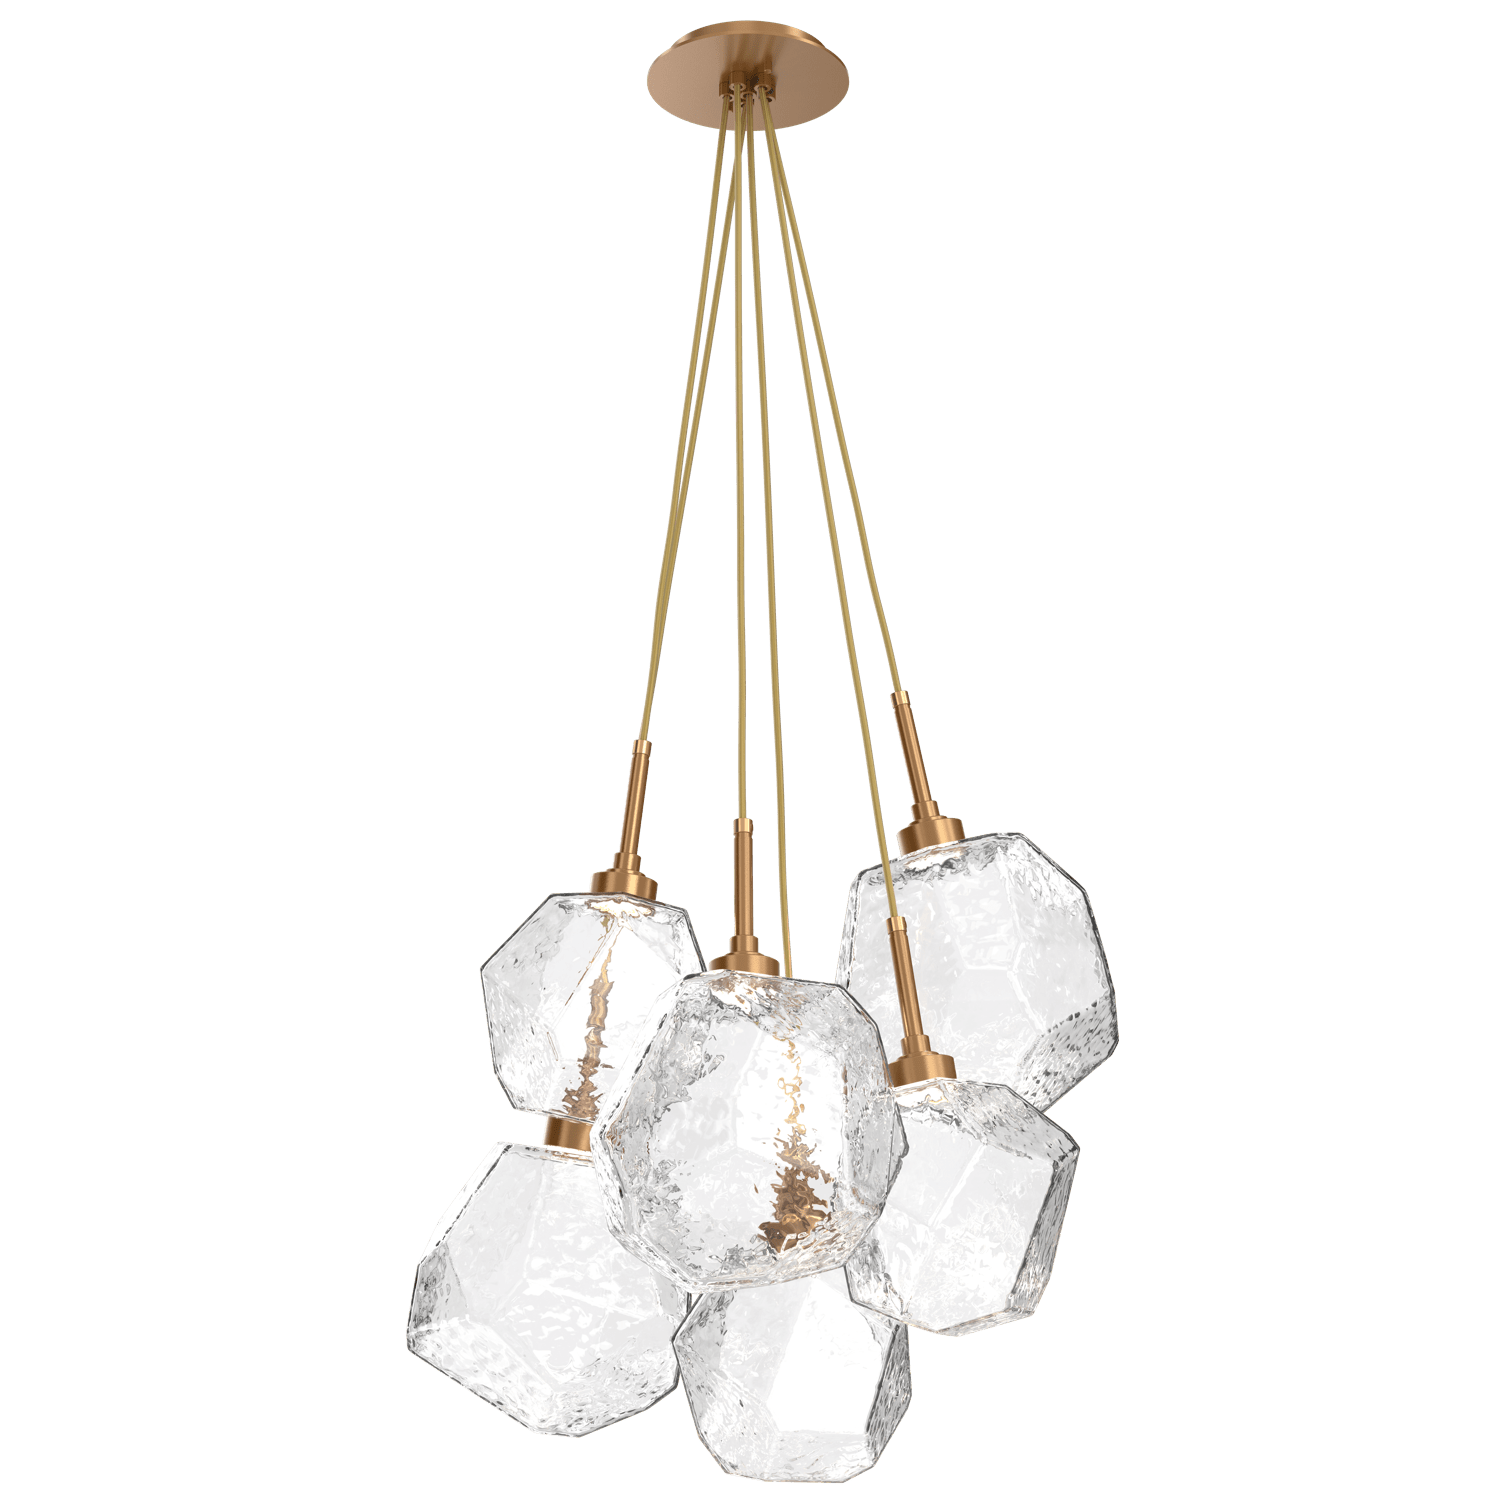 CHB0039-0F-NB-C-Hammerton-Studio-Gem-6-light-cluster-pendant-light-with-novel-brass-finish-and-clear-blown-glass-shades-and-LED-lamping